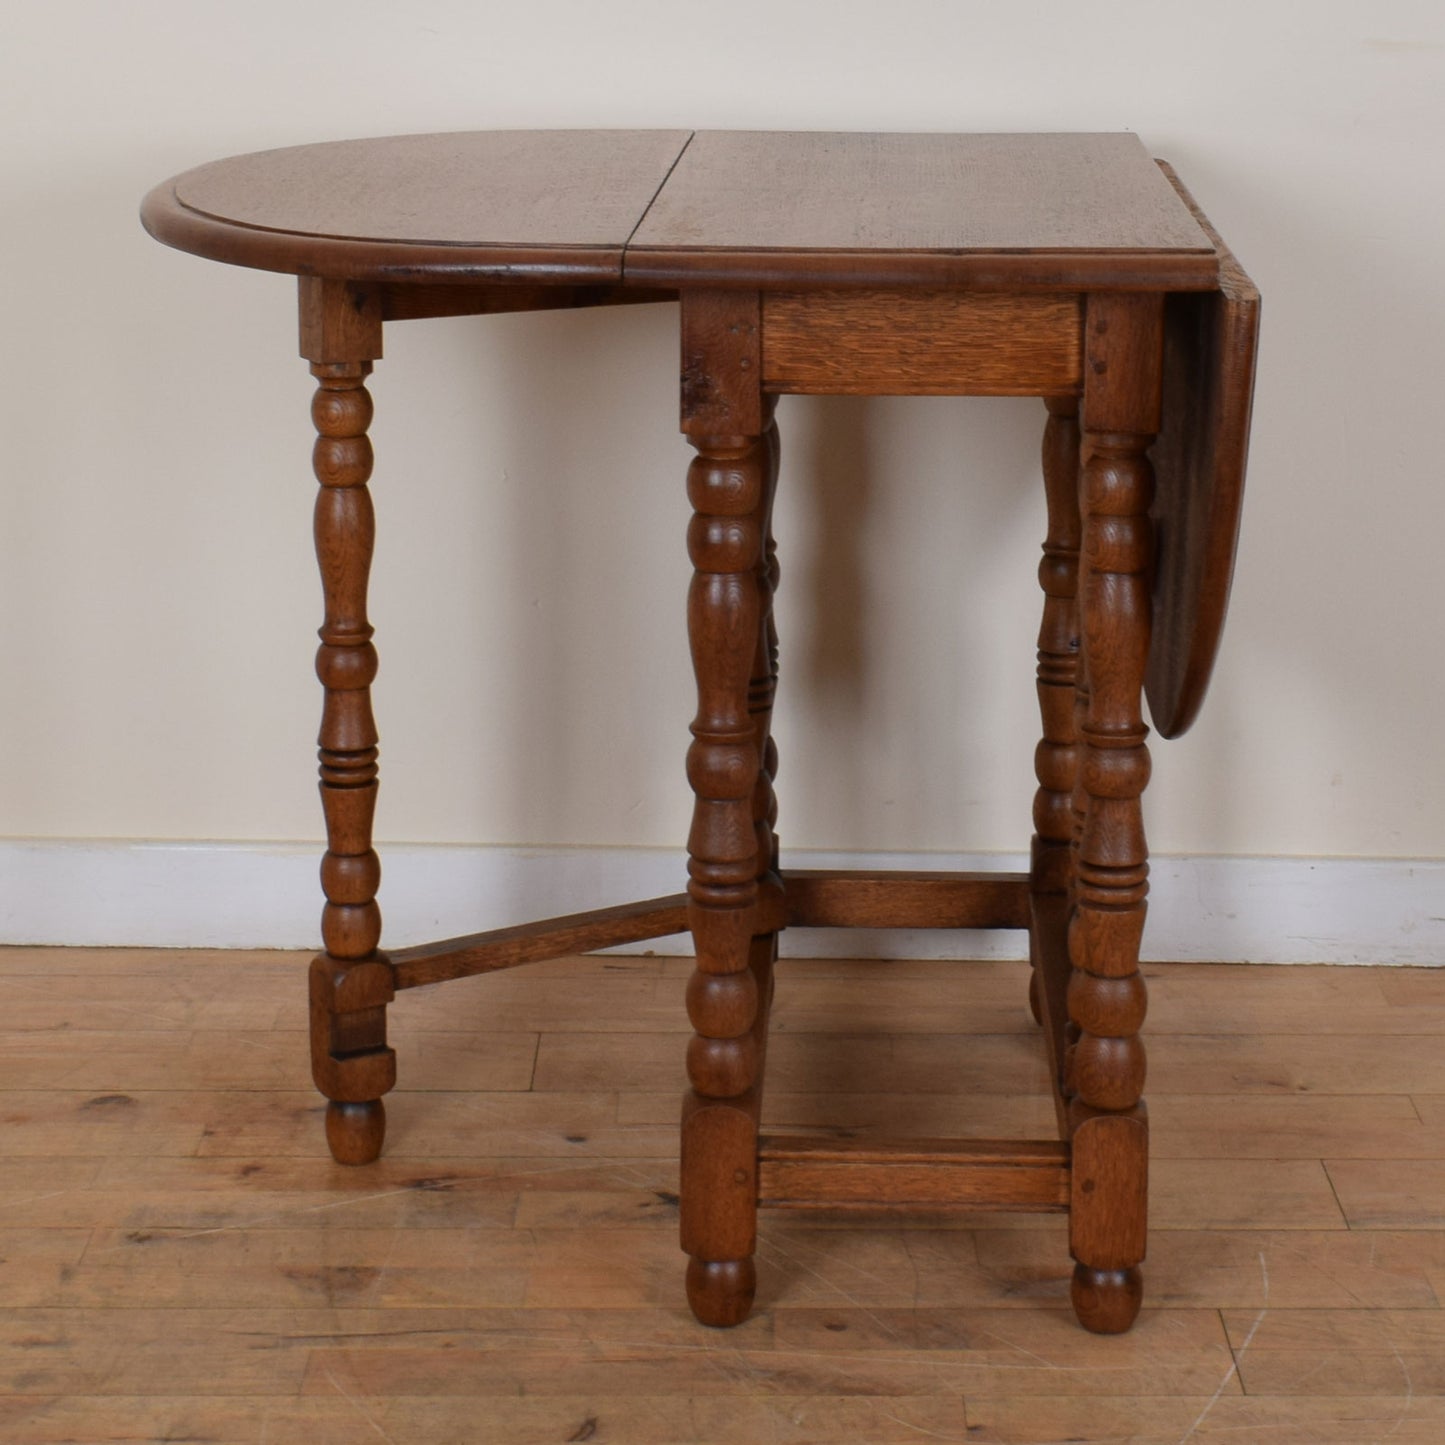 Drop Leaf Table and Two